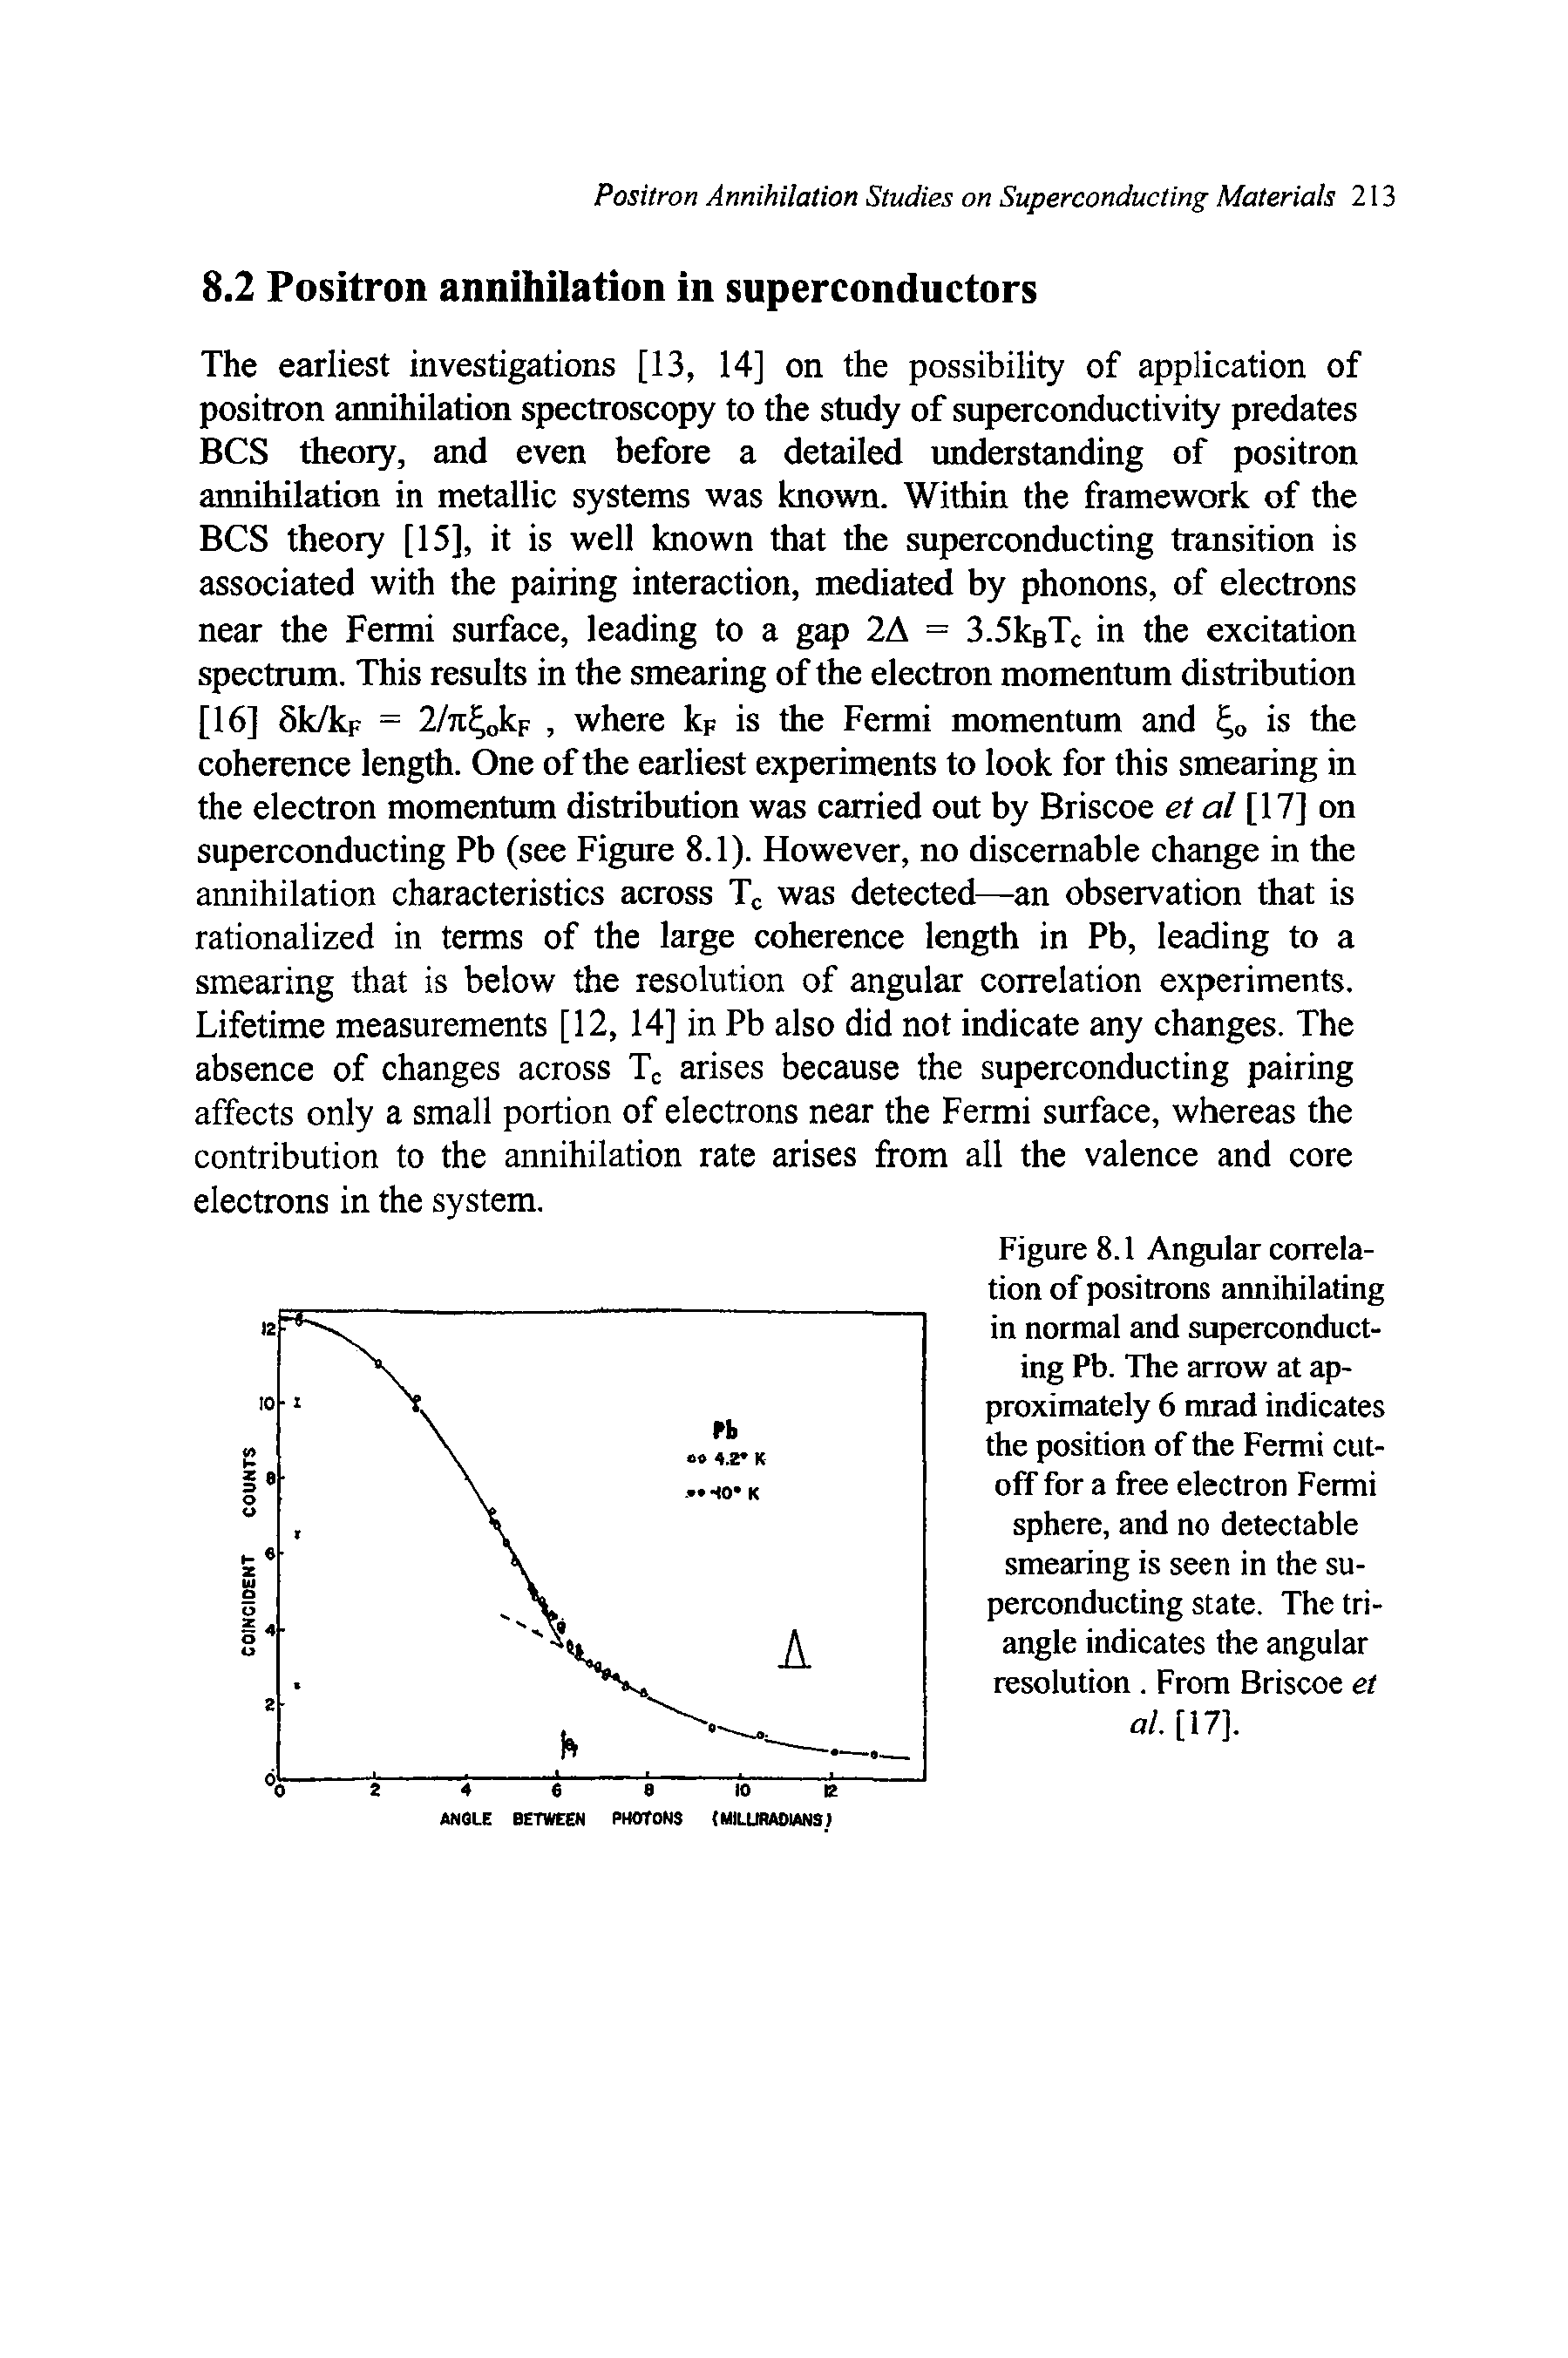 Figure 8.1 Angular correlation of positrons annihilating in normal and superconducting Pb. The arrow at approximately 6 mrad indicates the position of the Fermi cutoff for a free electron Fermi sphere, and no detectable smearing is seen in the superconducting state. The triangle indicates the angular resolution. From Briscoe et al. [17],...